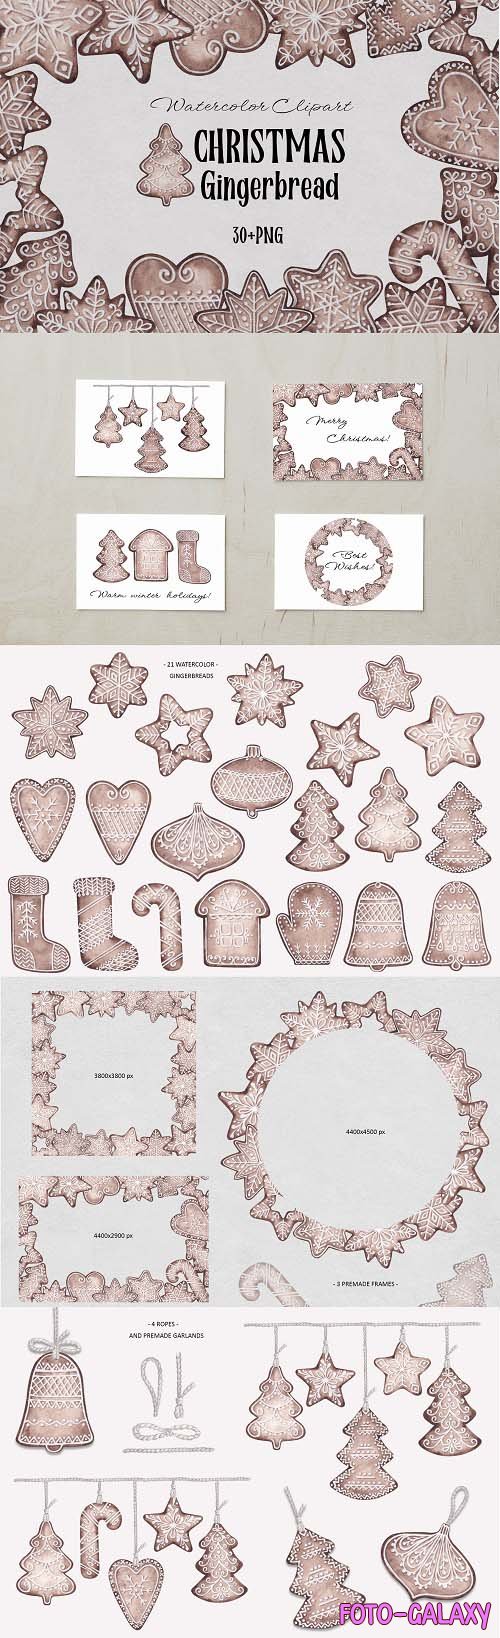 Watercolor Clipart Christmas Gingerbread - 1631337